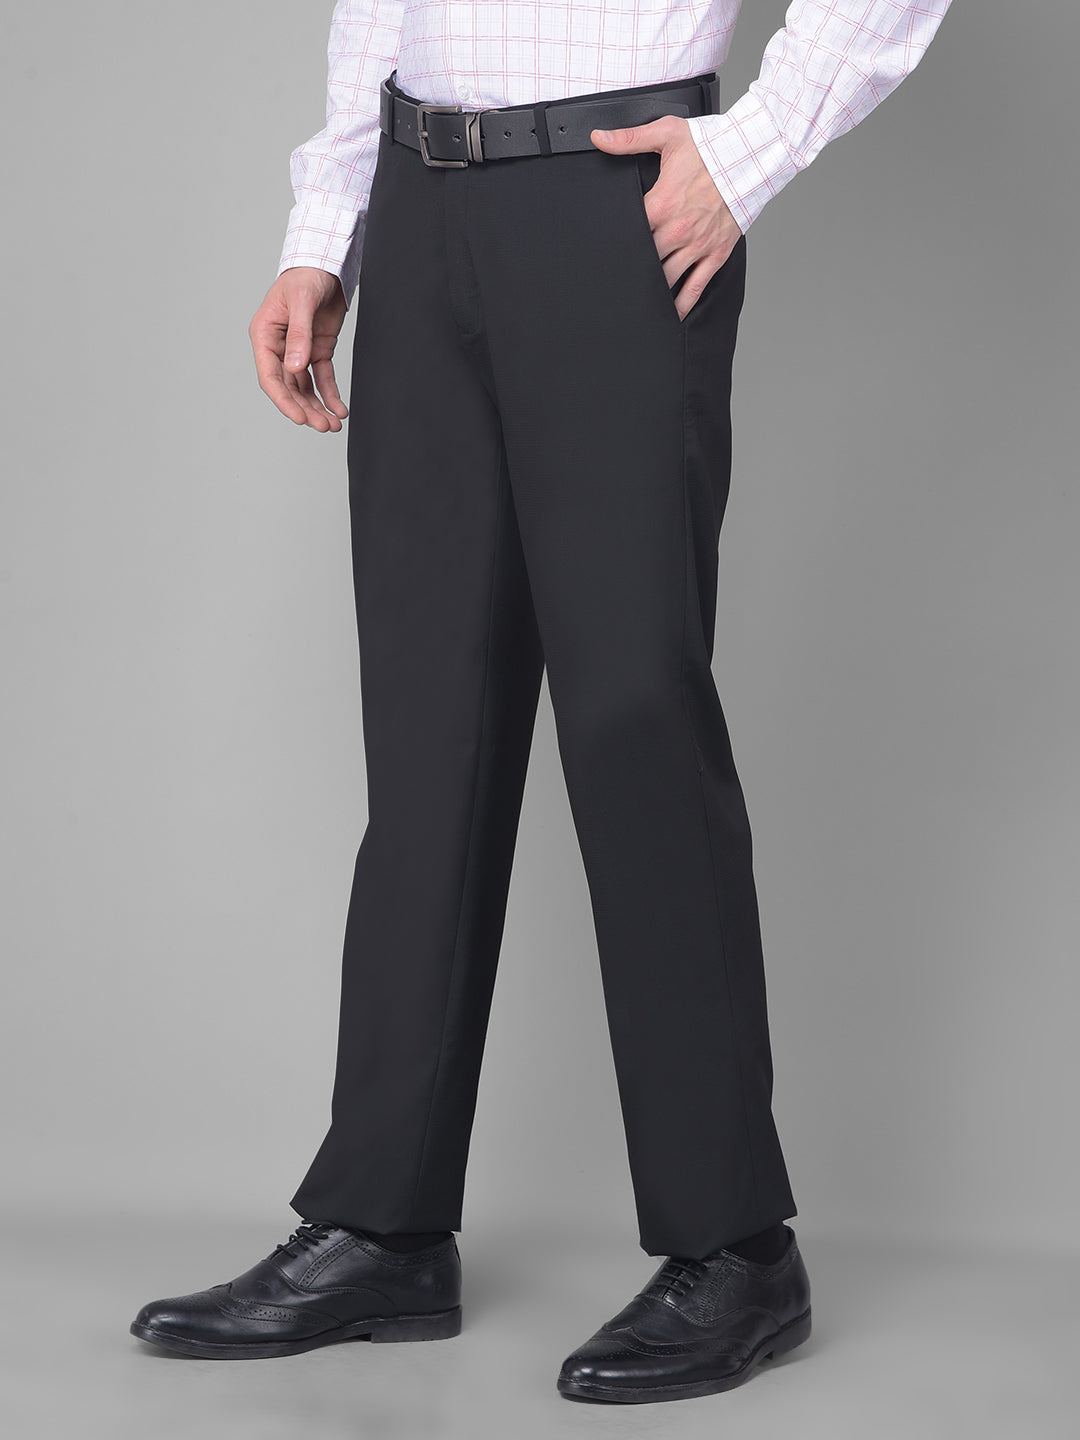 Buy INSPIRE CLOTHING INSPIRATION Men Solid Slim Fit Formal Trouser - Black  Online at Low Prices in India - Paytmmall.com